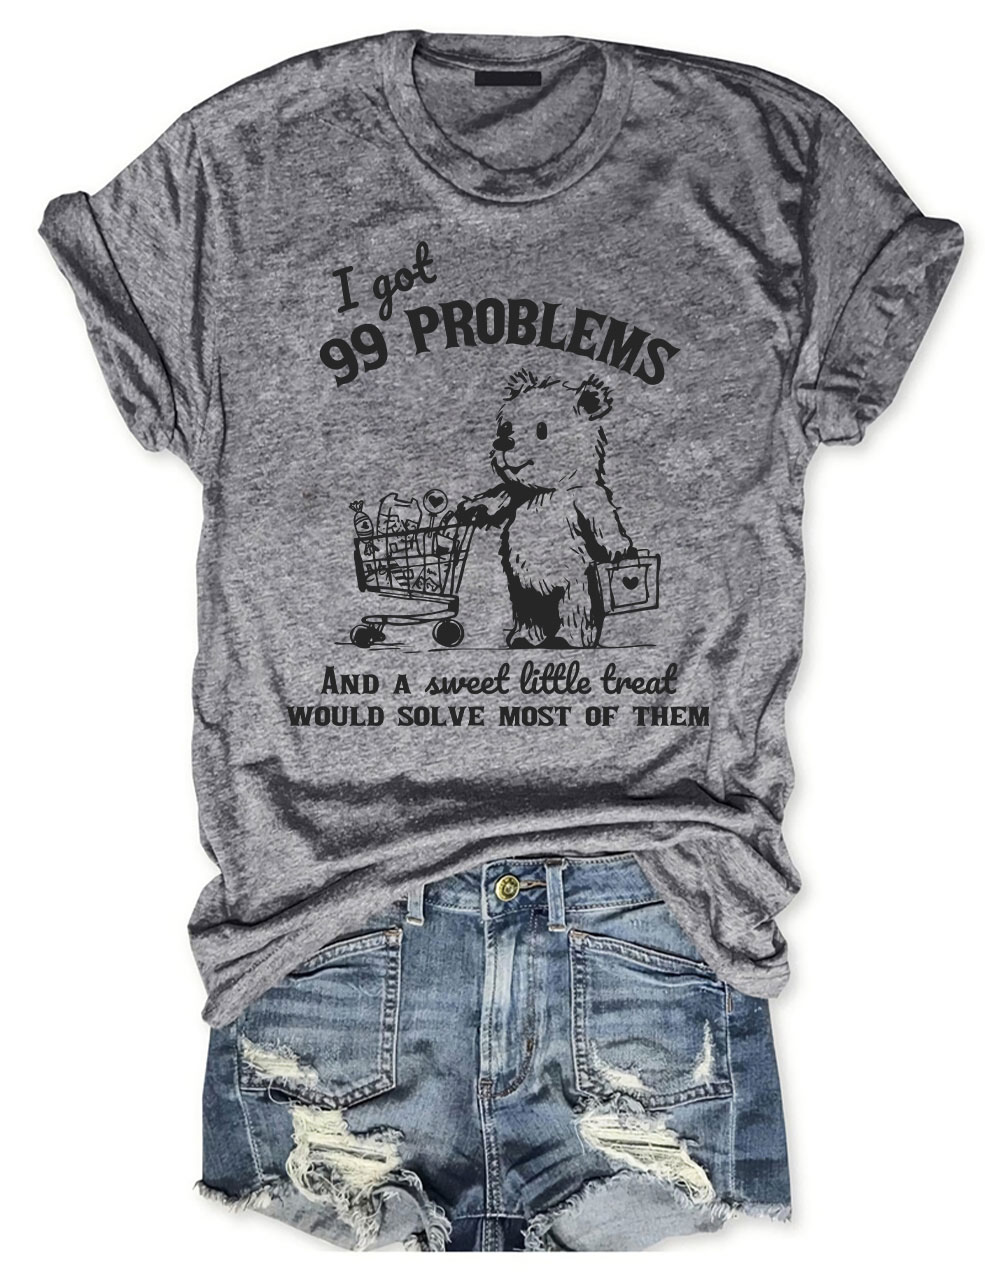 99 Poblems And A Sweet Little Treat Would Solve Most Of Them Vintage T-Shirt